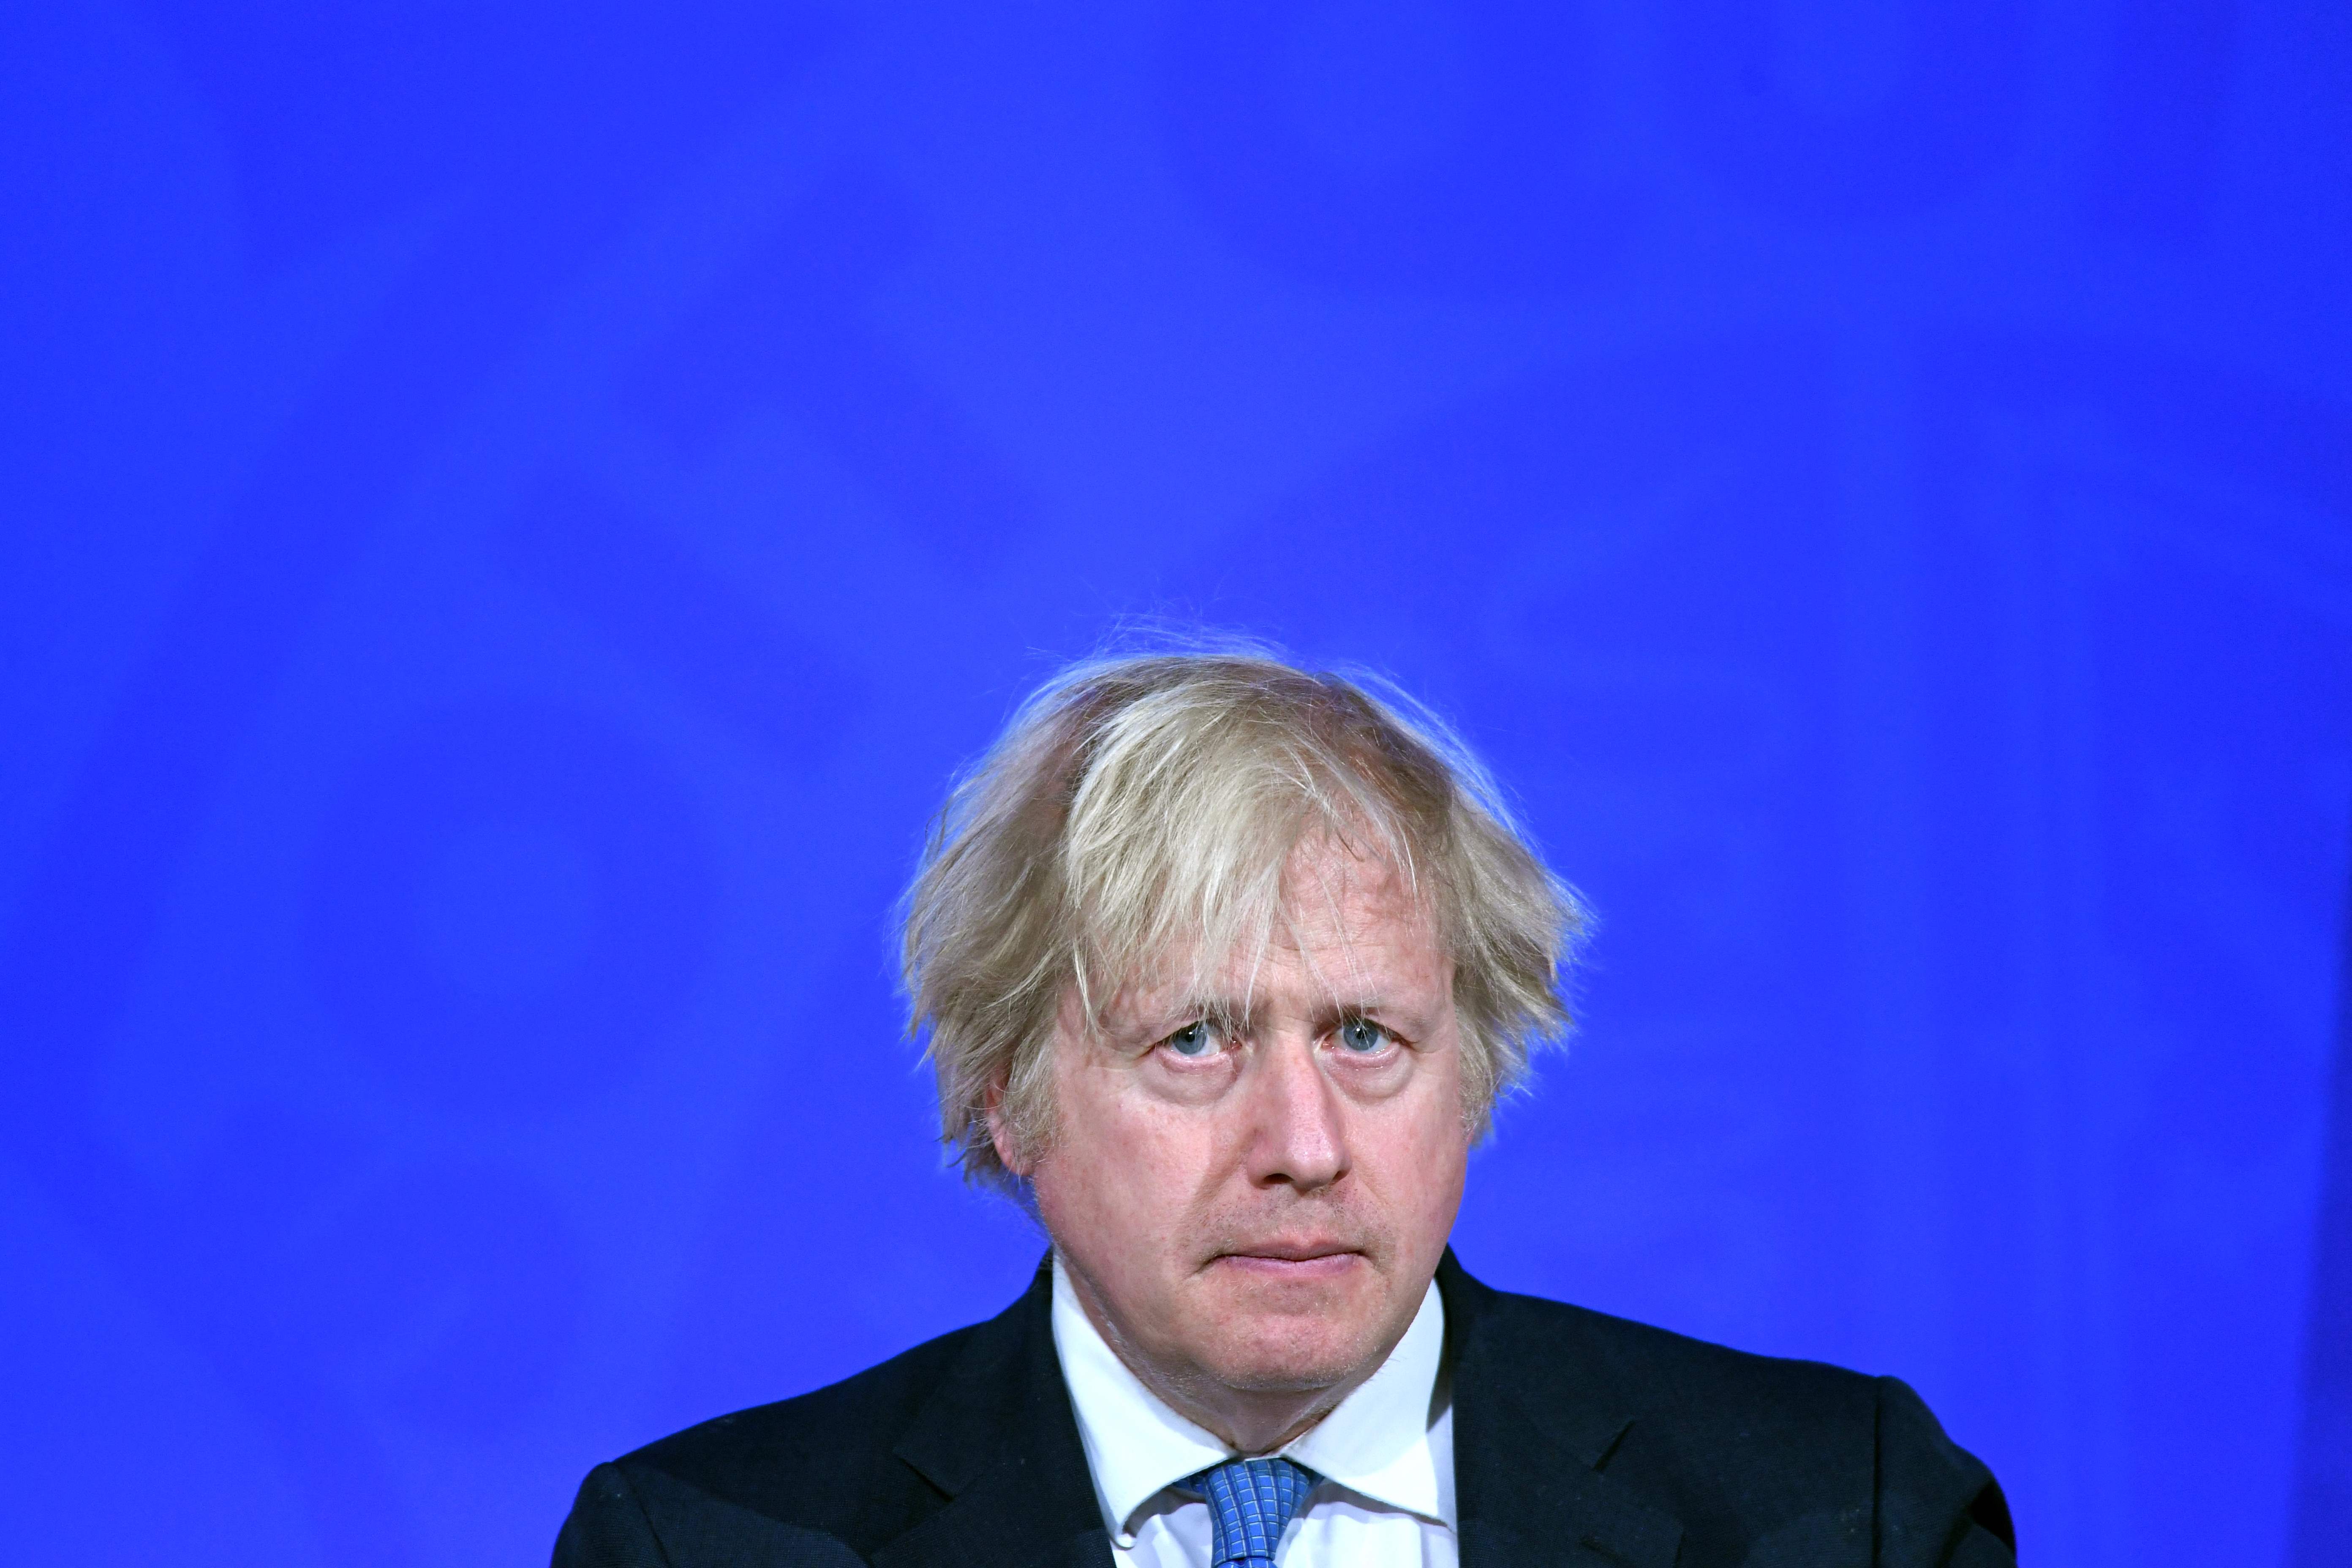 Boris Johnson will probably hand out many more UK work visas to India